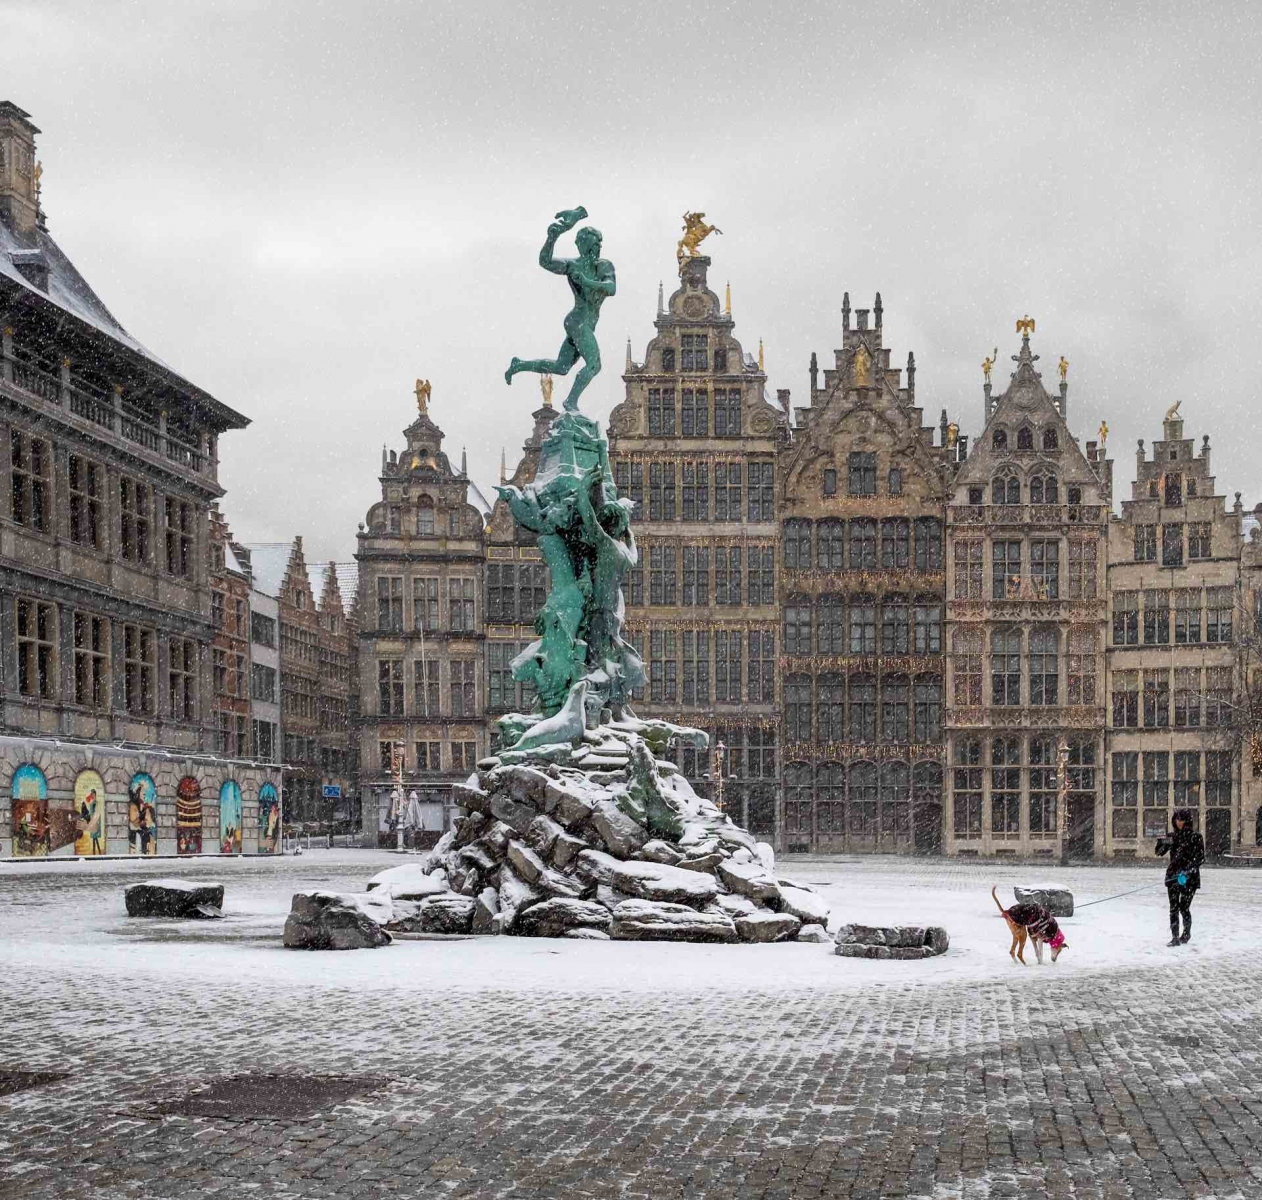 The "Grote Markt" square in the city of Antwerp, covered in snow